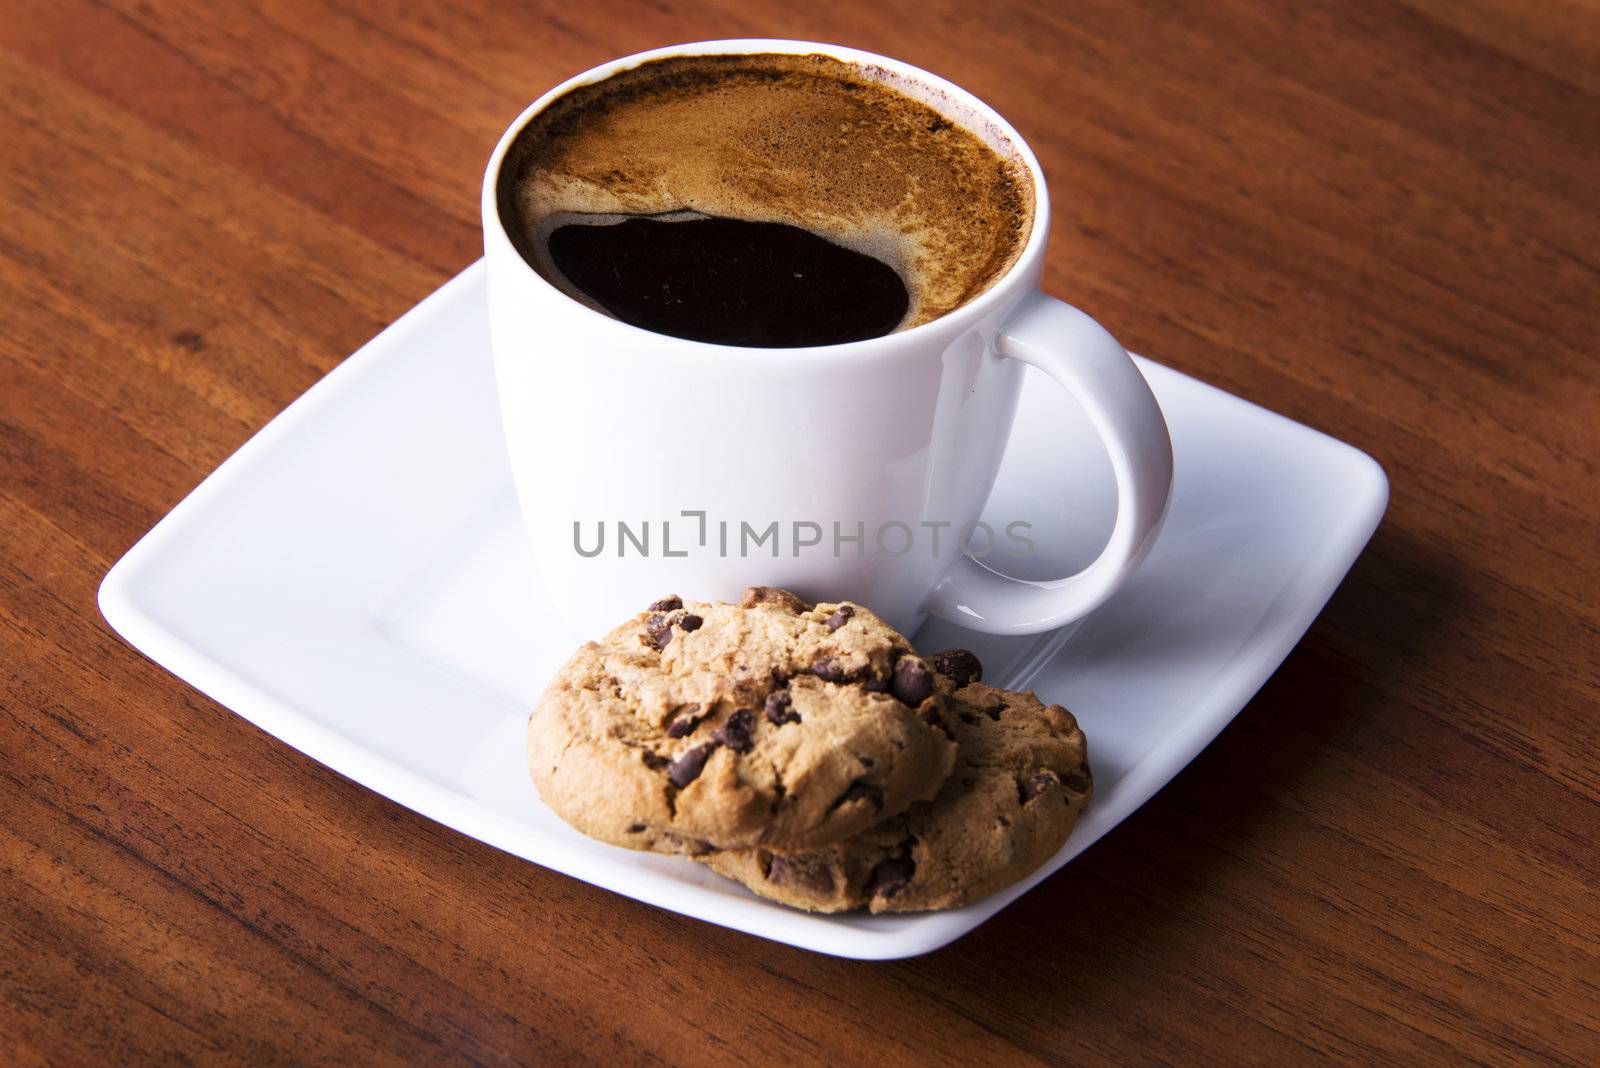 Coffee with cookie on table